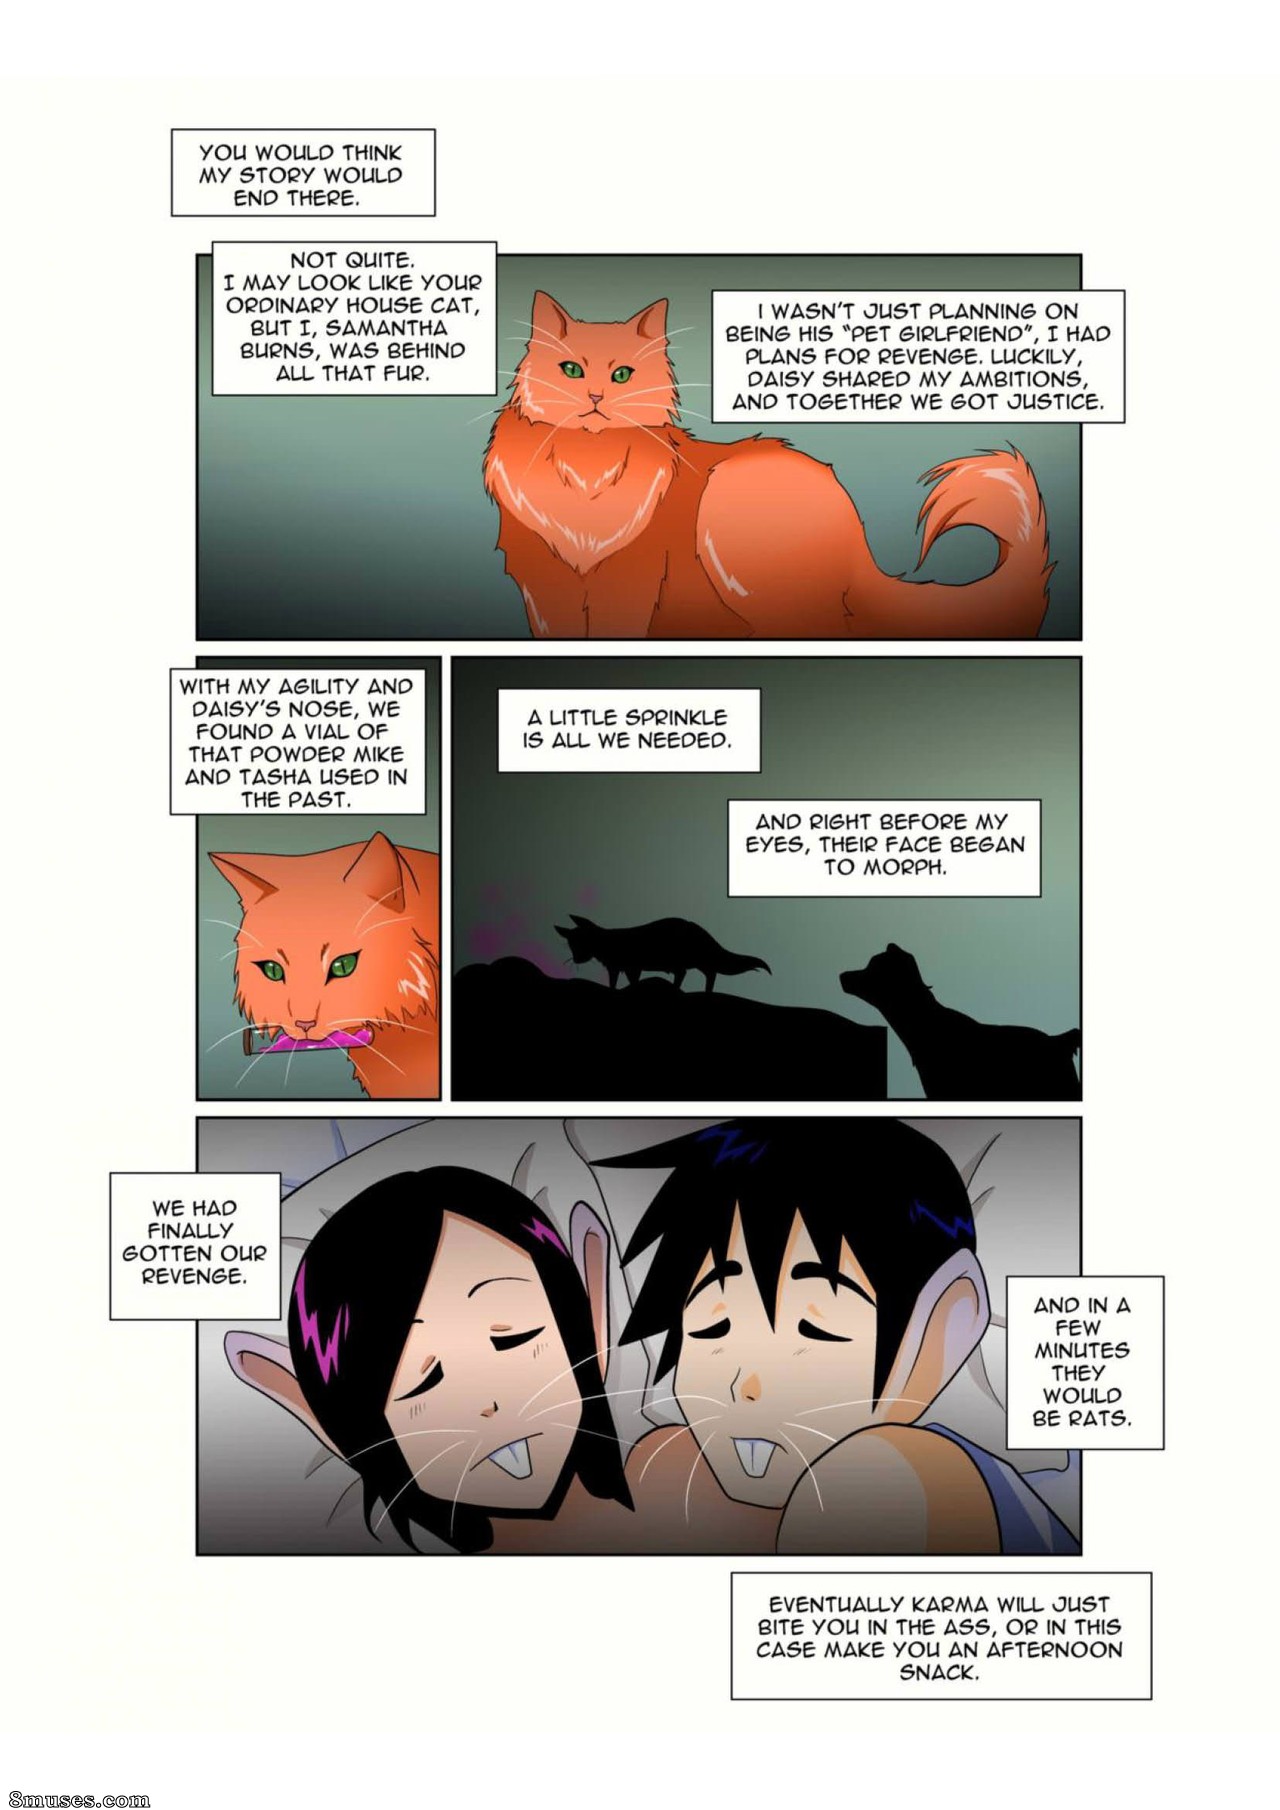 My Pet Girlfriend Issue 1 - 8muses Comics